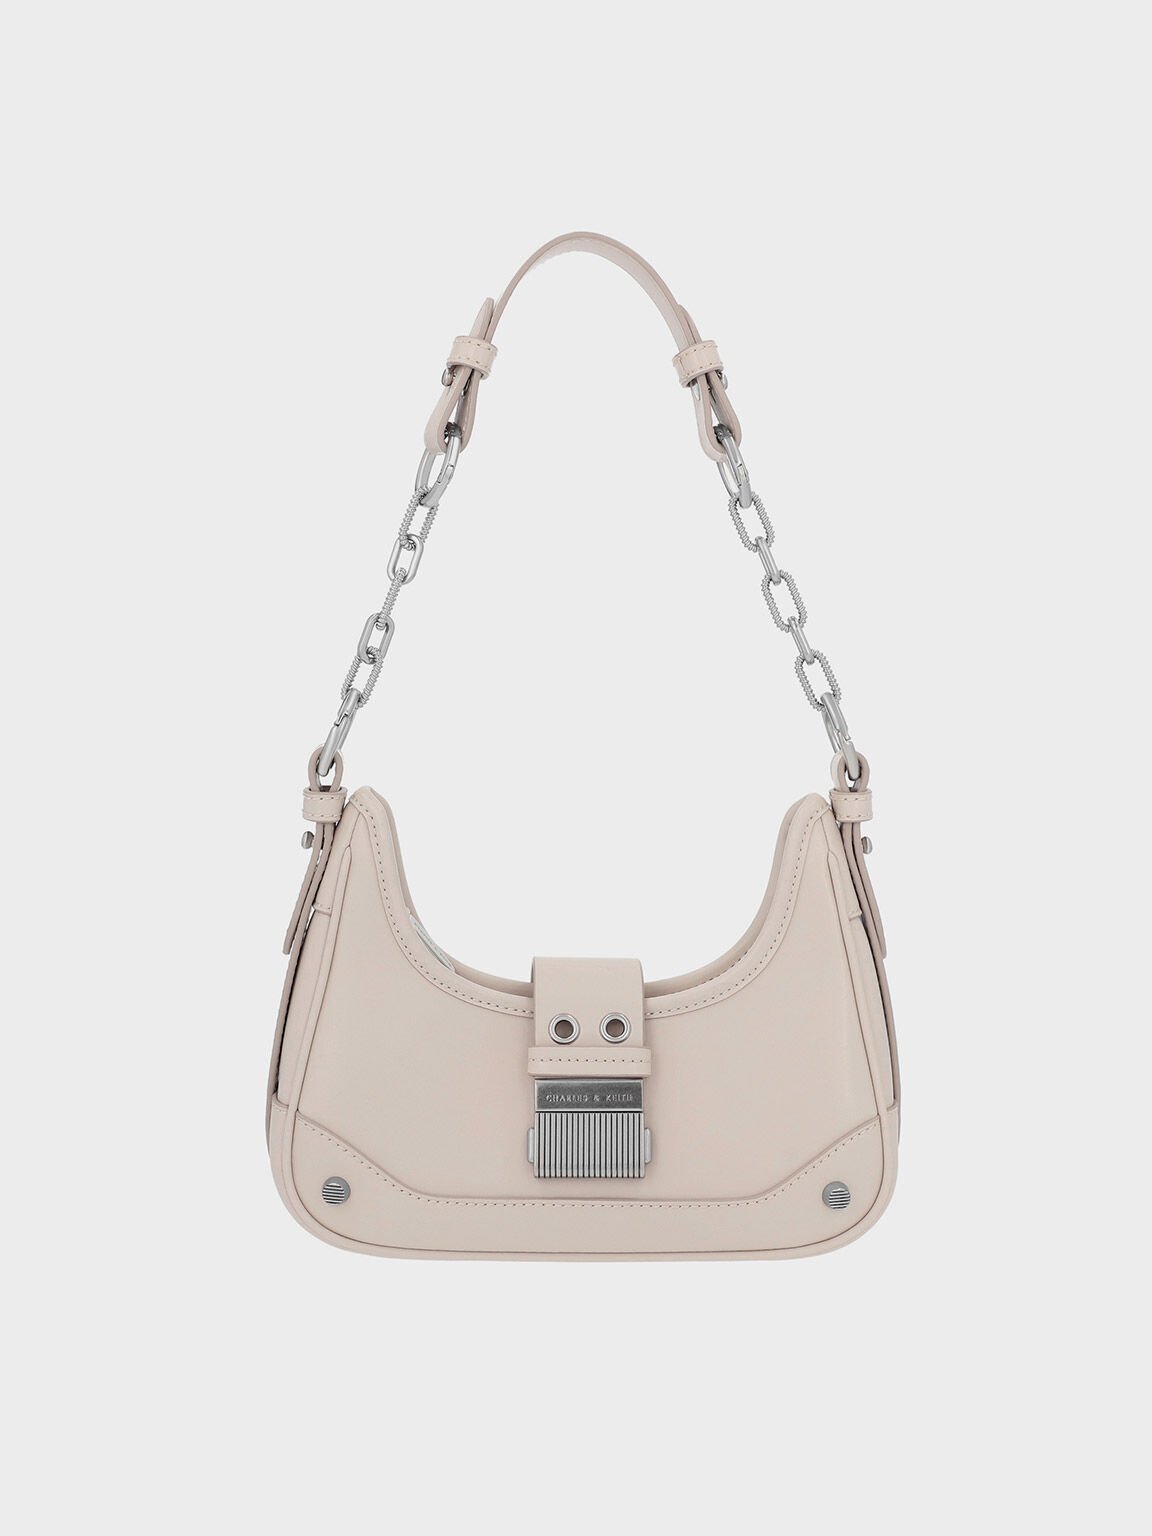 Women's Bags | Shop Exclusive Styles | CHARLES & KEITH FR